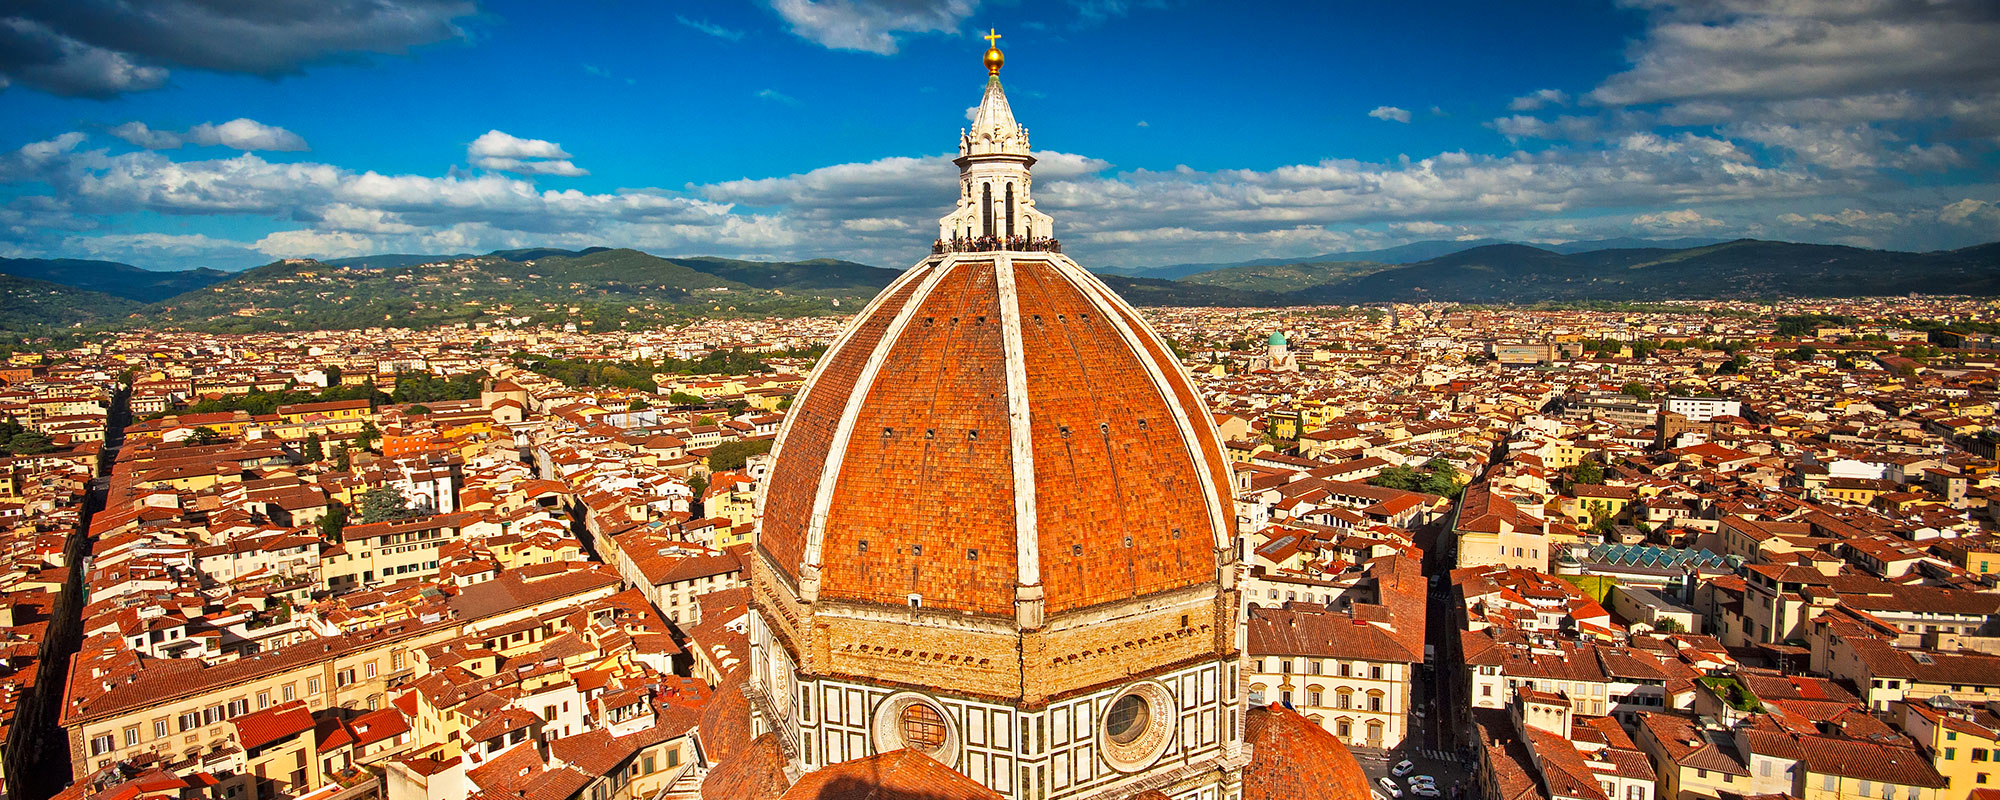 places to stay in florence italy